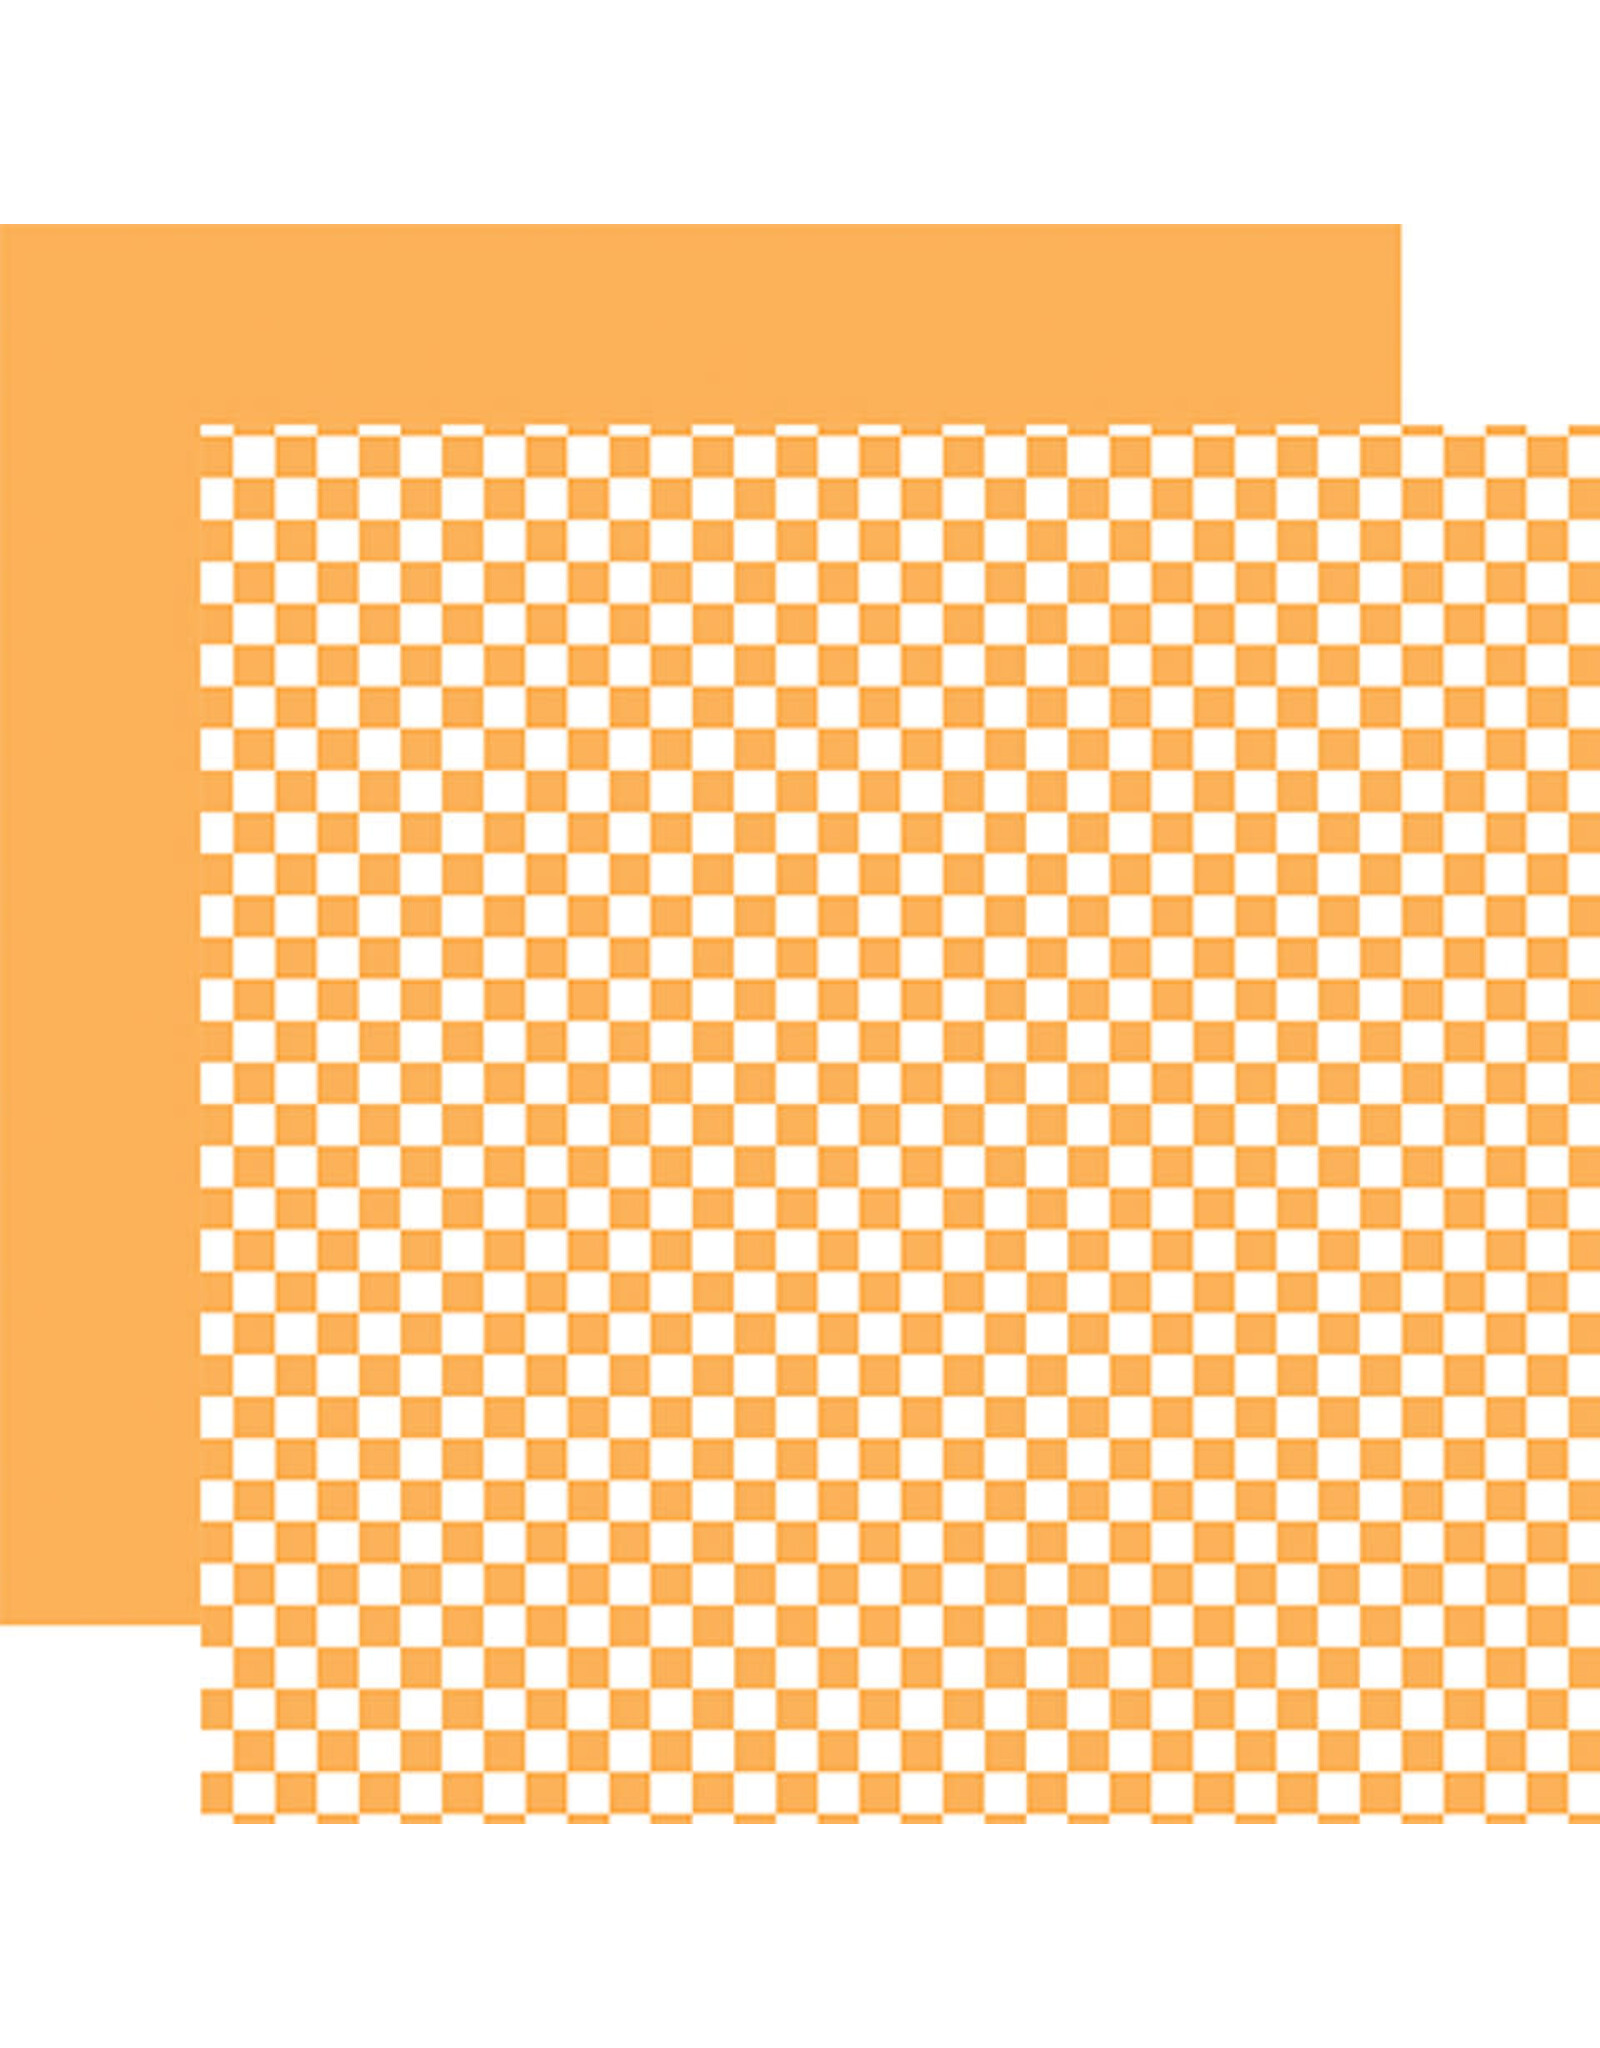 Echo Park Checkerboard:  Carrot 12x12 Patterned Paper